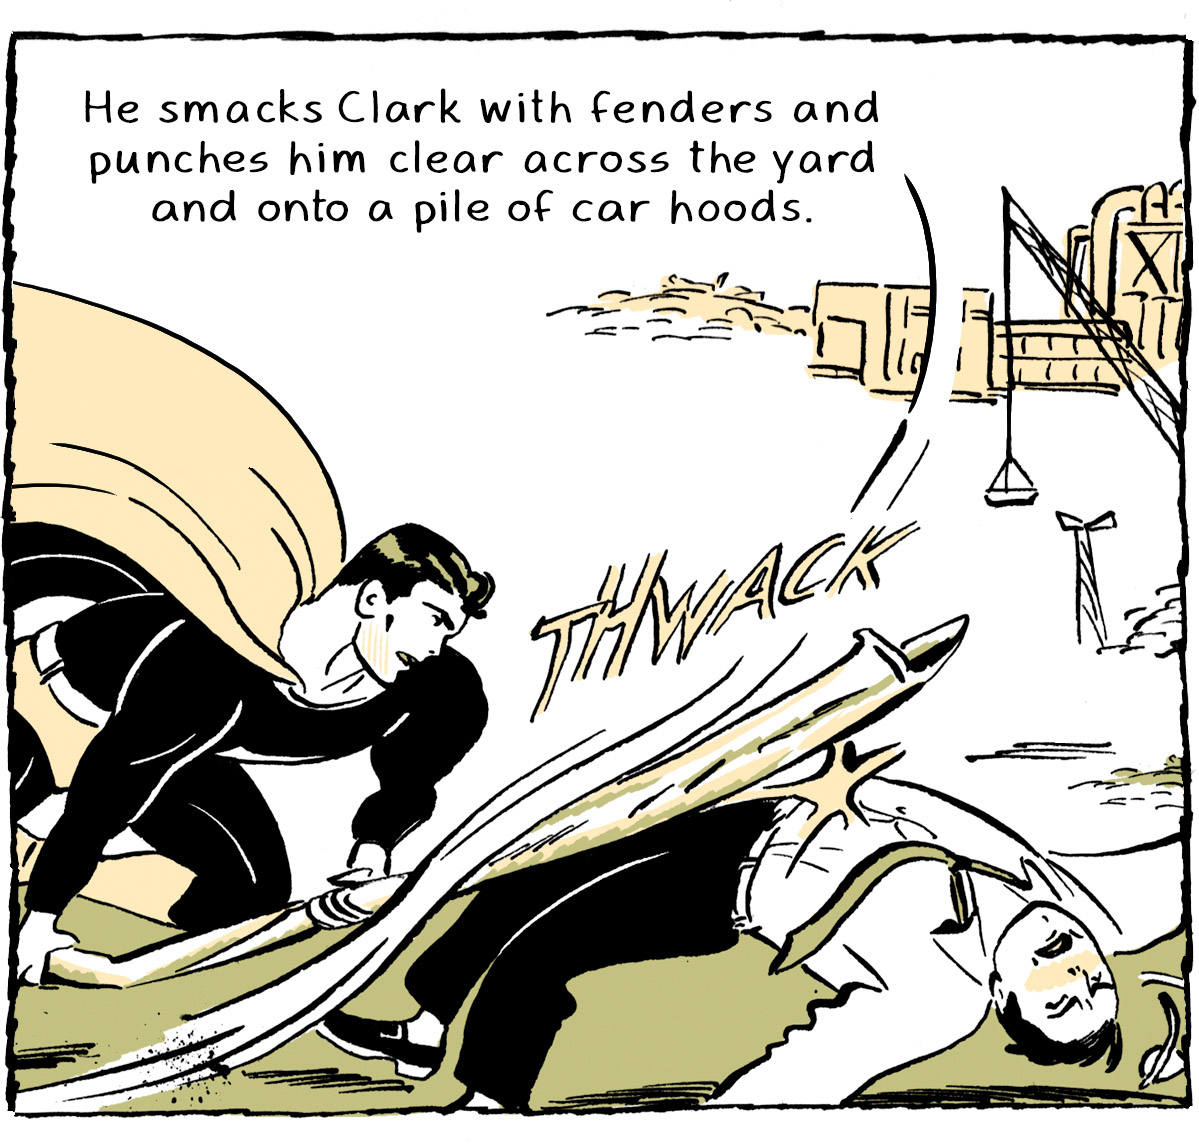 “He smacks Clark with fenders and punches him clear across the yard and onto a pile of car hoods.” A large TWACK sound effect is written over Clark, his body flying backwards.